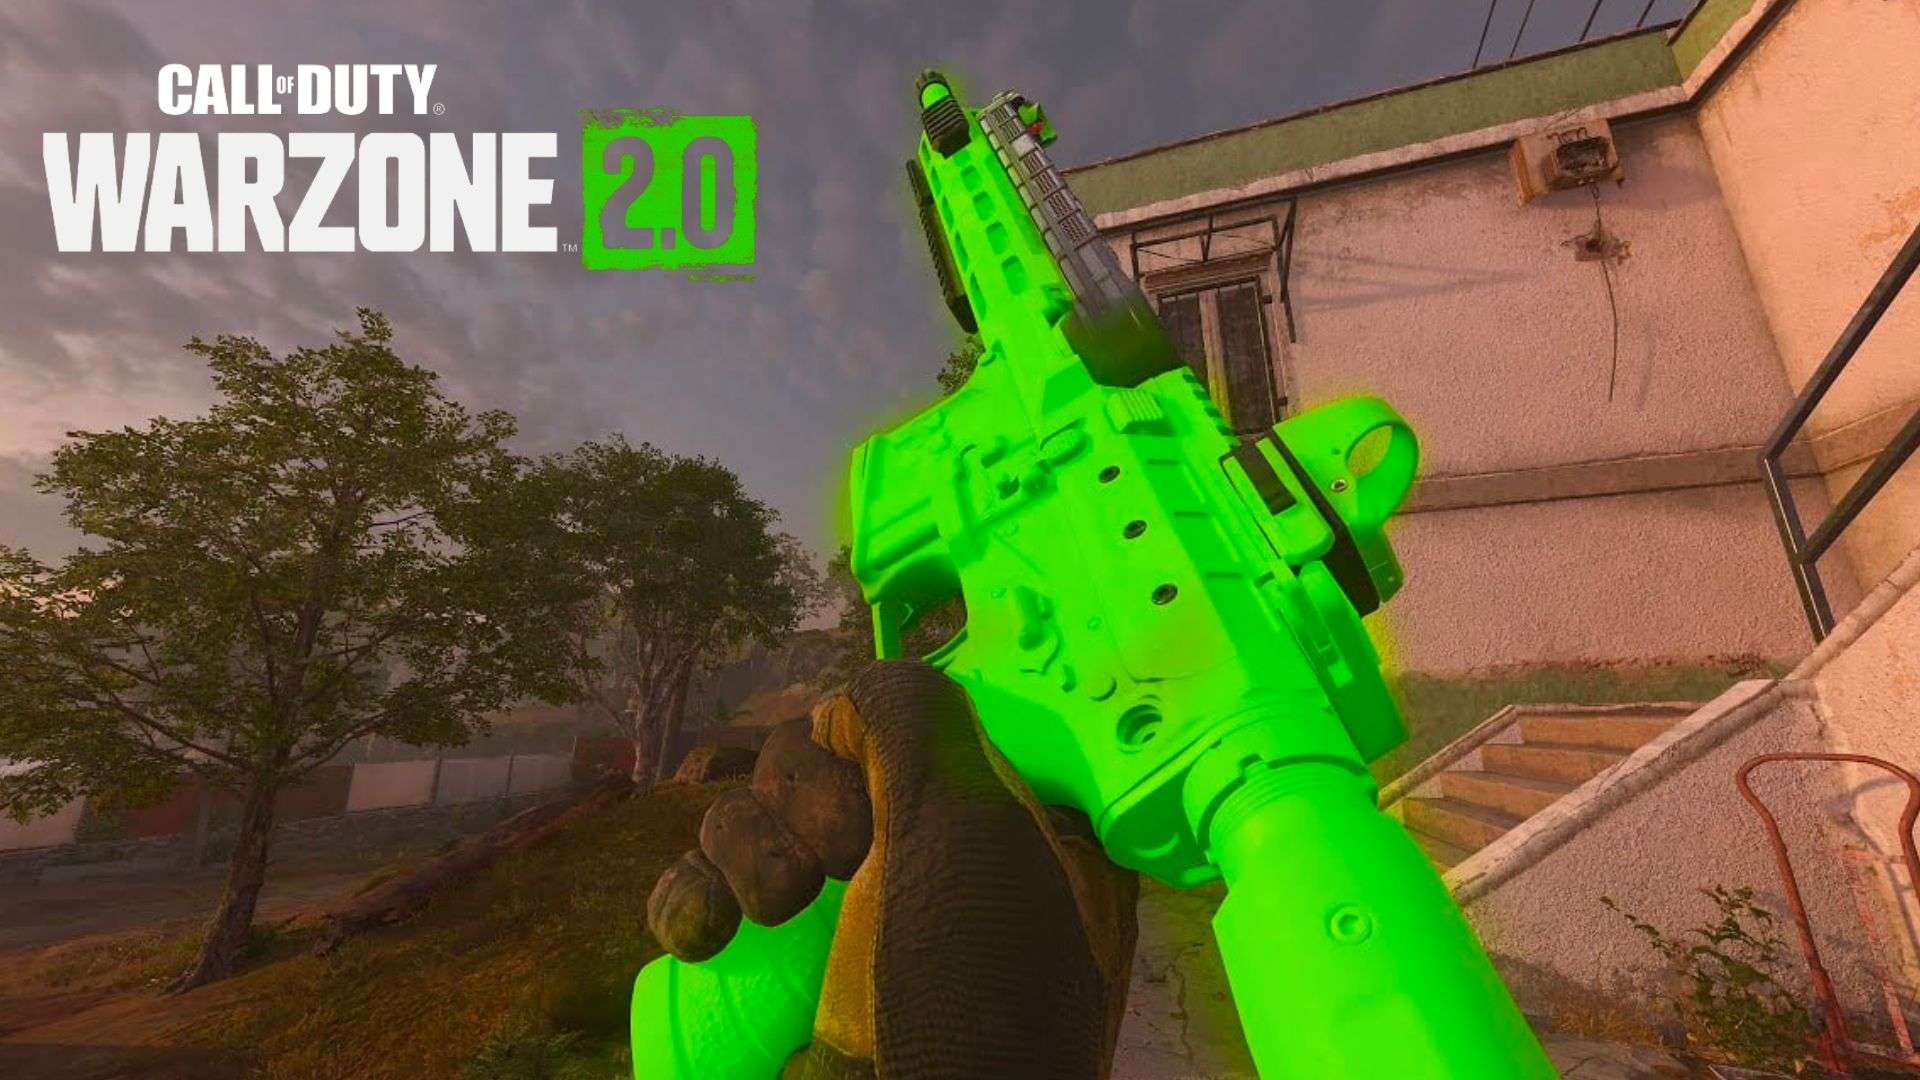 Neon green gun in Warzone 2 being pointed at the sky